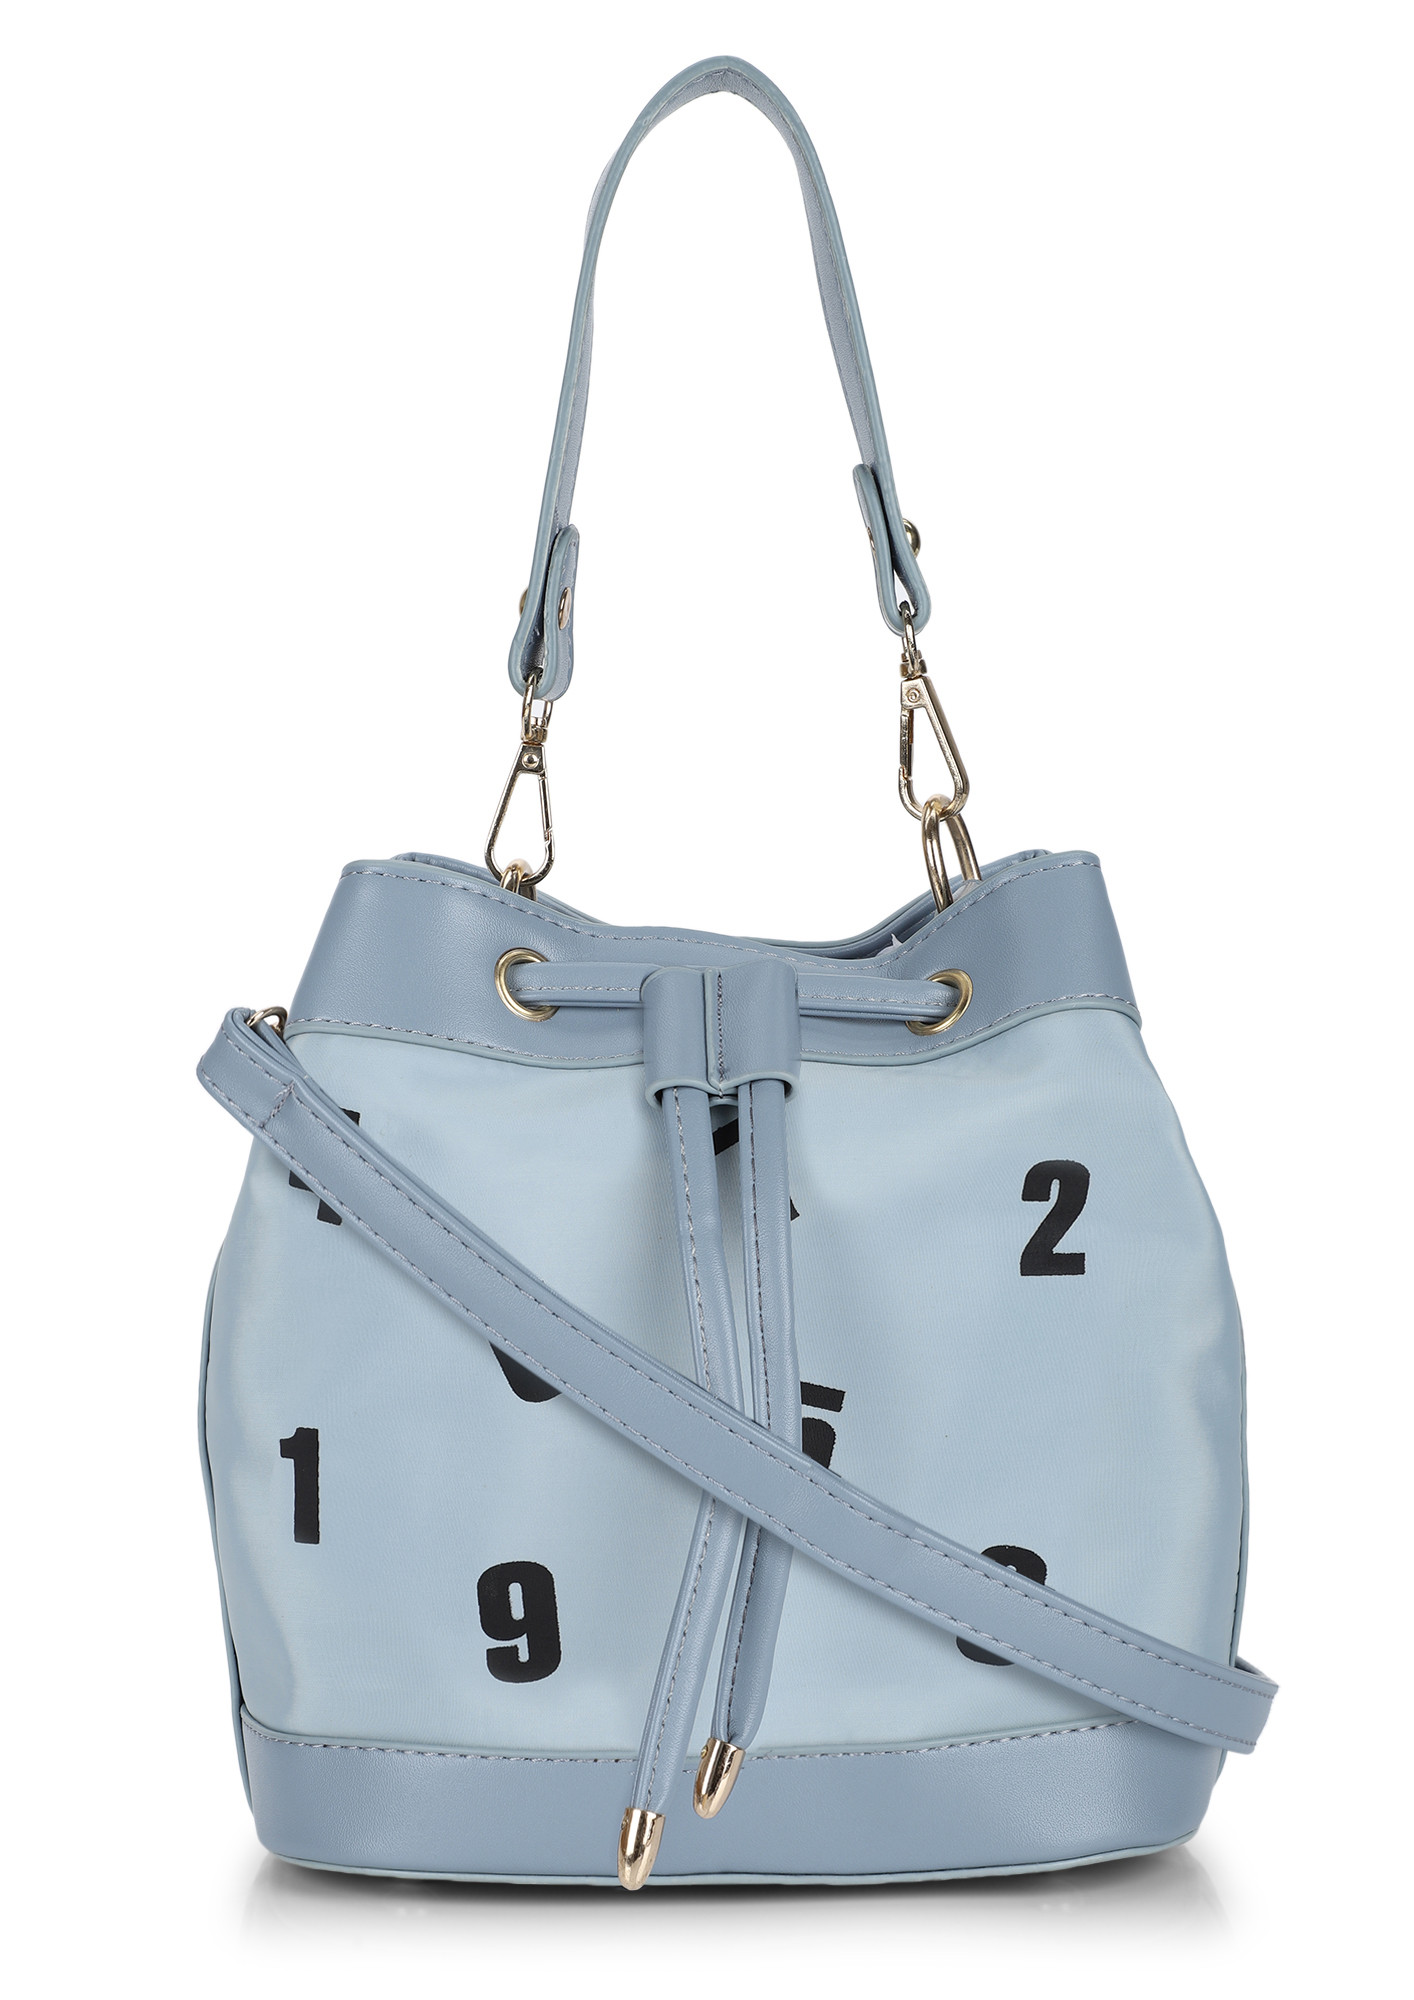 9 AM-TO-9 PM BLUE BUCKET BAG